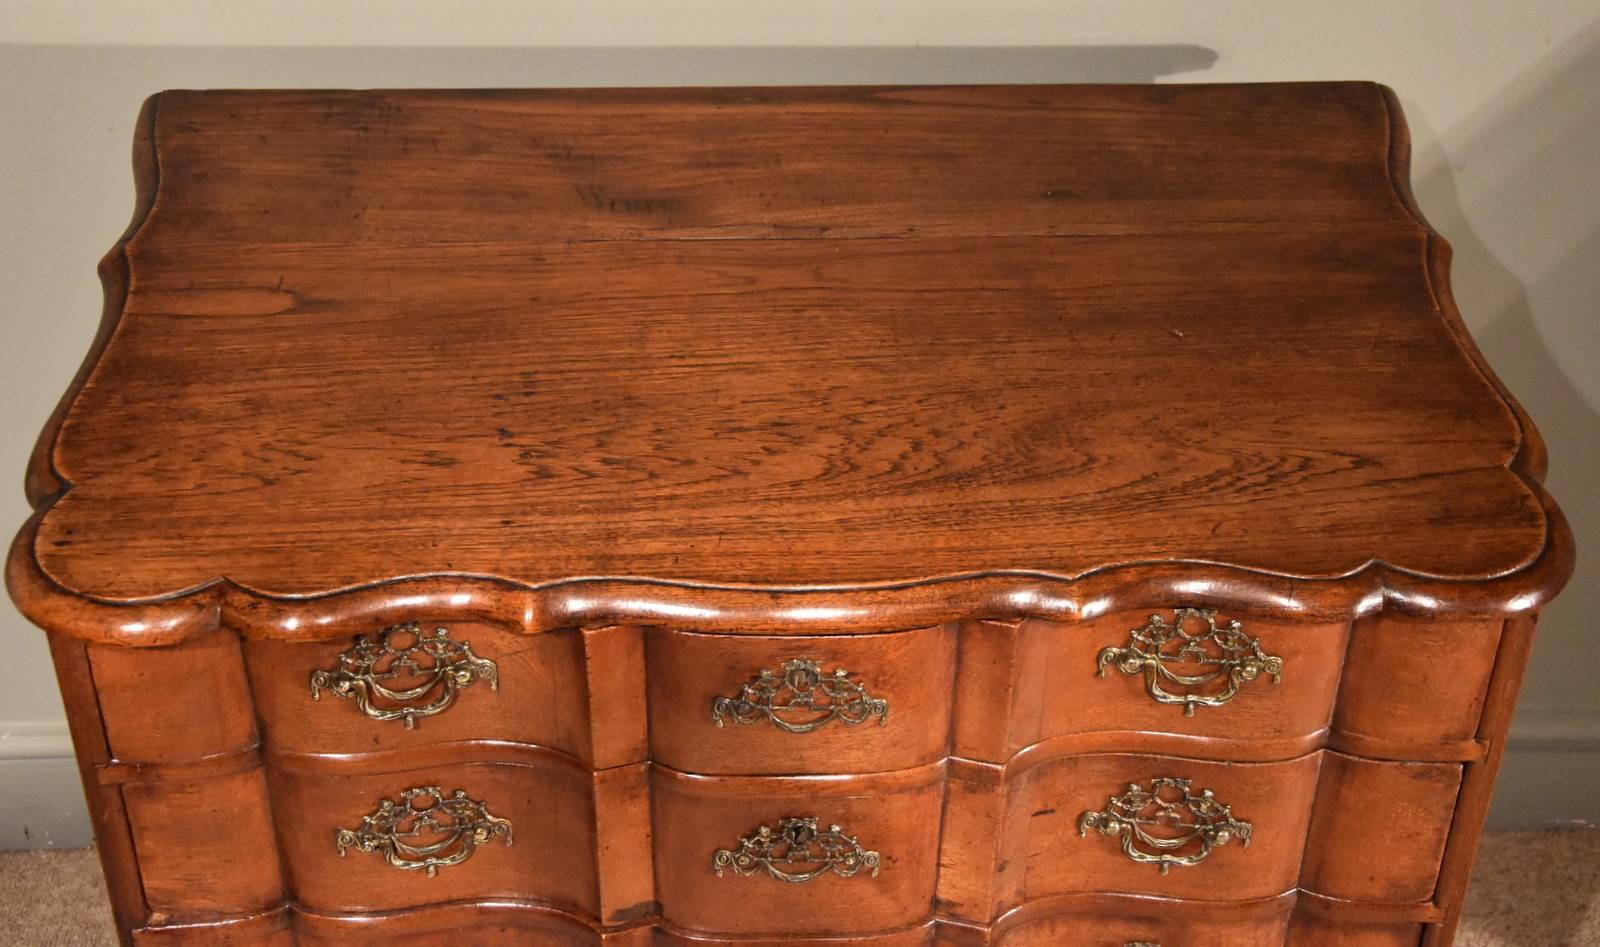 18th century Dutch chestnut commode chest with wavy serpentine front and original brass handles and escutcheons

Dimensions
height 33.5